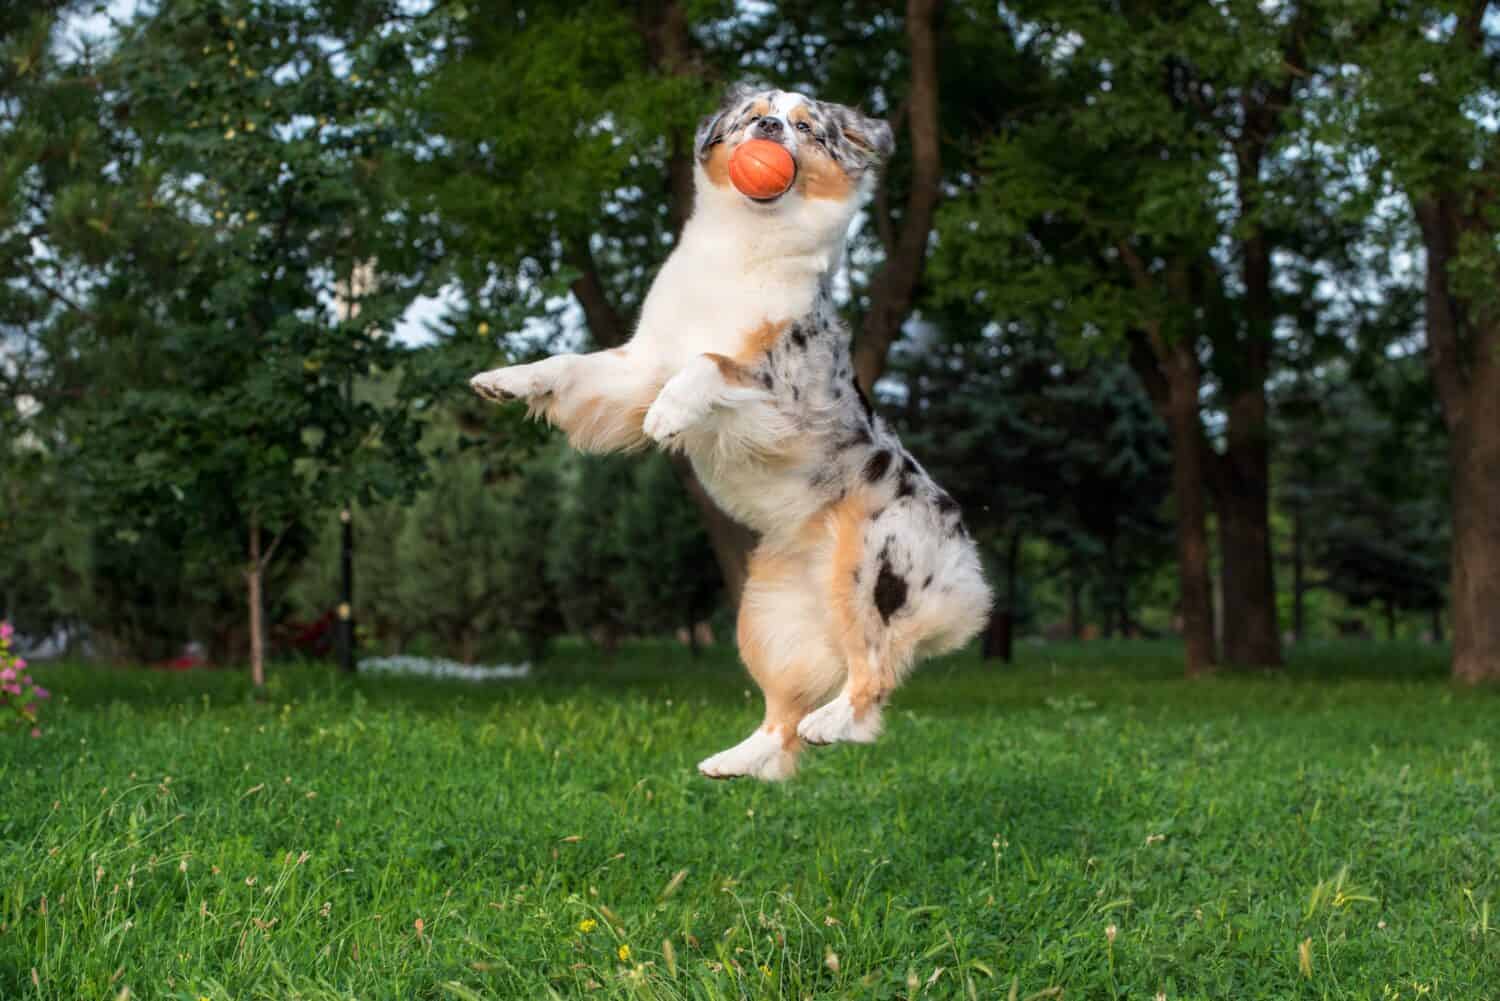 Australian shepherd dog plays with an orange ball in the air in summer